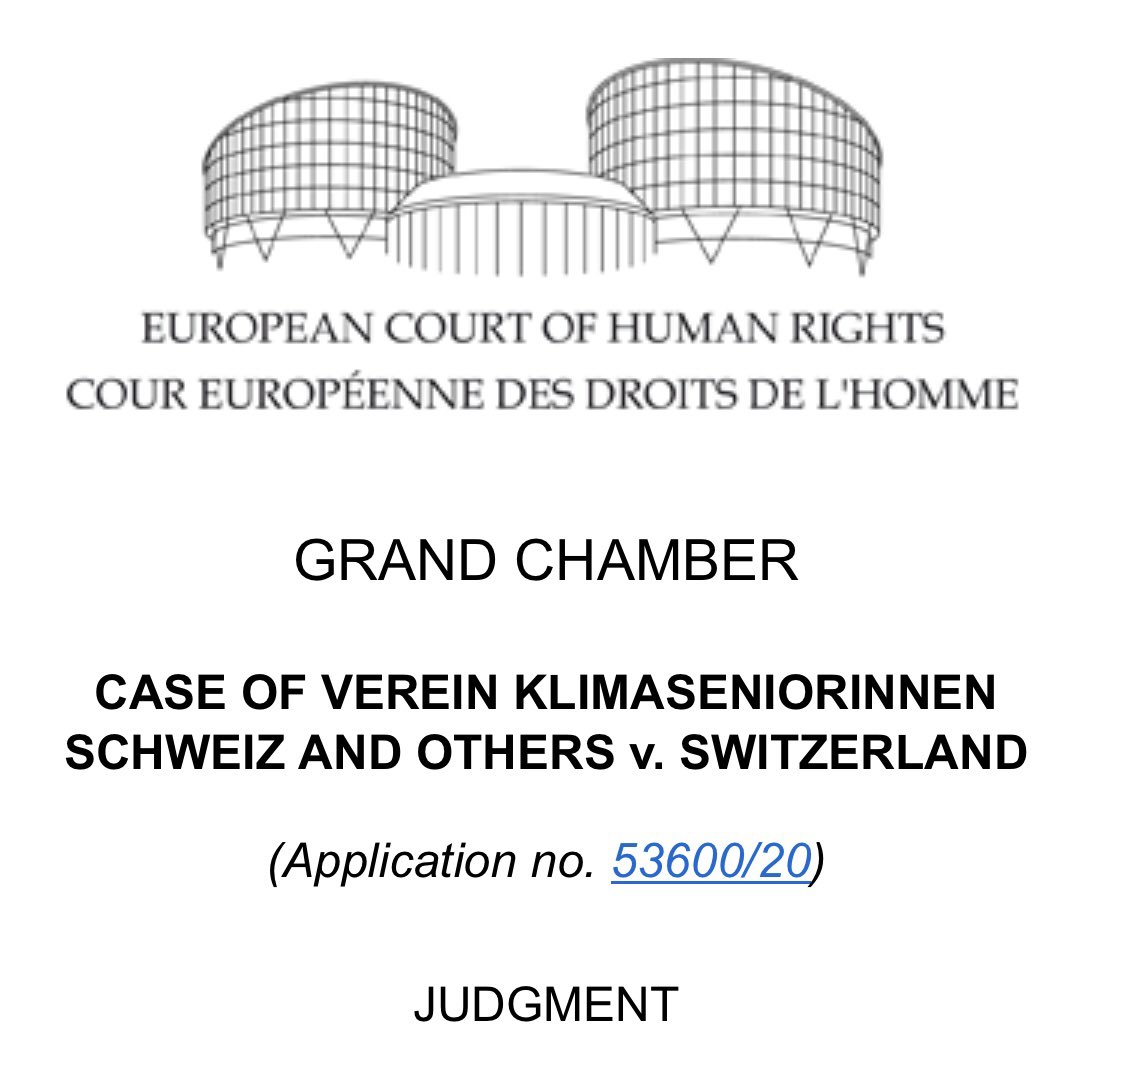 1/ The Klimaseniorinnen judgment has resulted in outcries by right parties lamenting judicial overreach and accusing „foreign“ judges of interfering with 🇨🇭 politics supposedly against fundamental democracy principles. Let‘s have a look at key excerpts of the judgment … 🧵